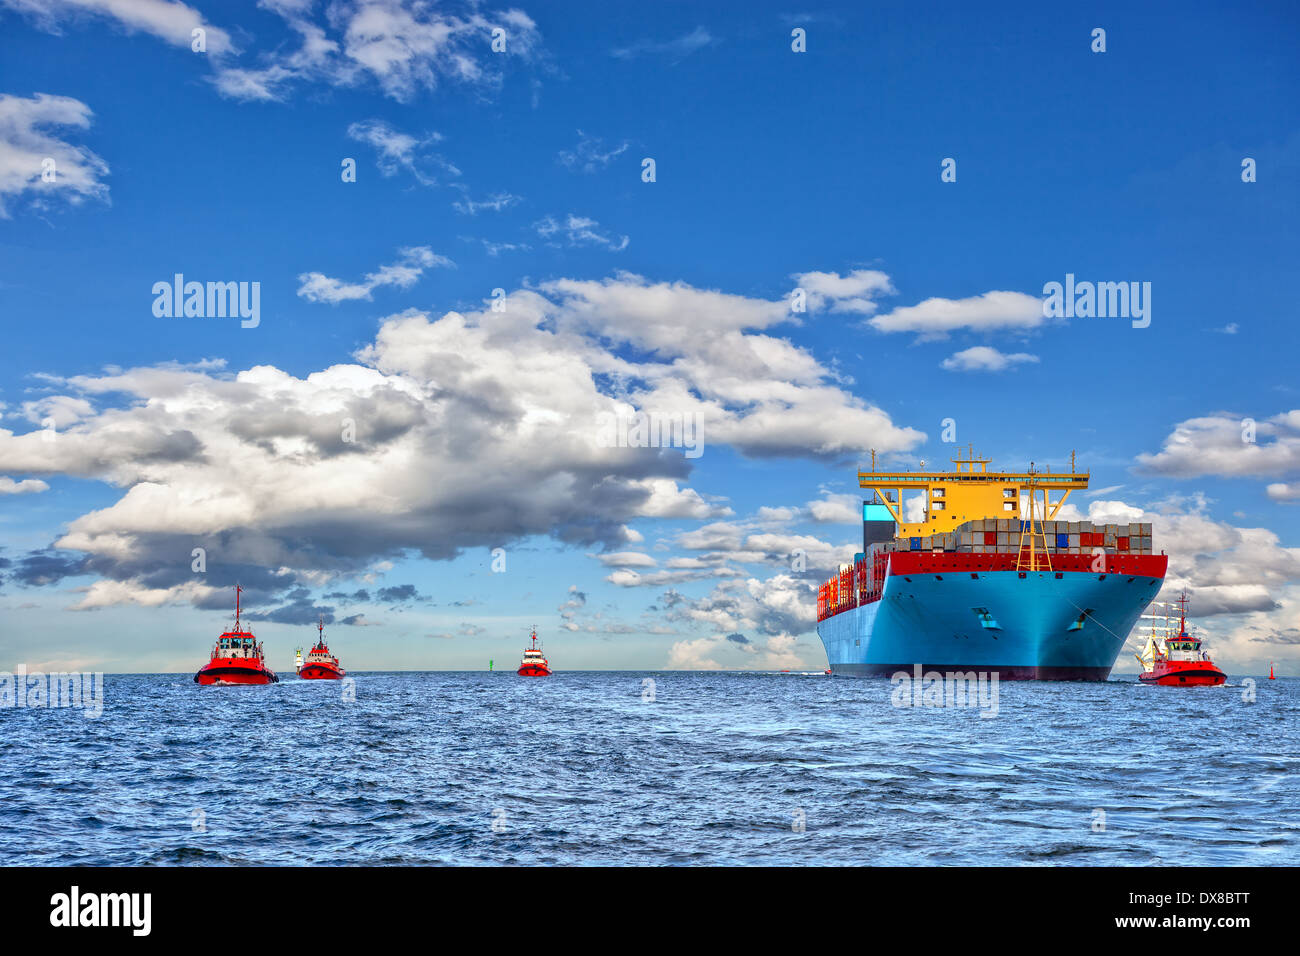 Tugboat assisting container cargo ship to harbor. Stock Photo